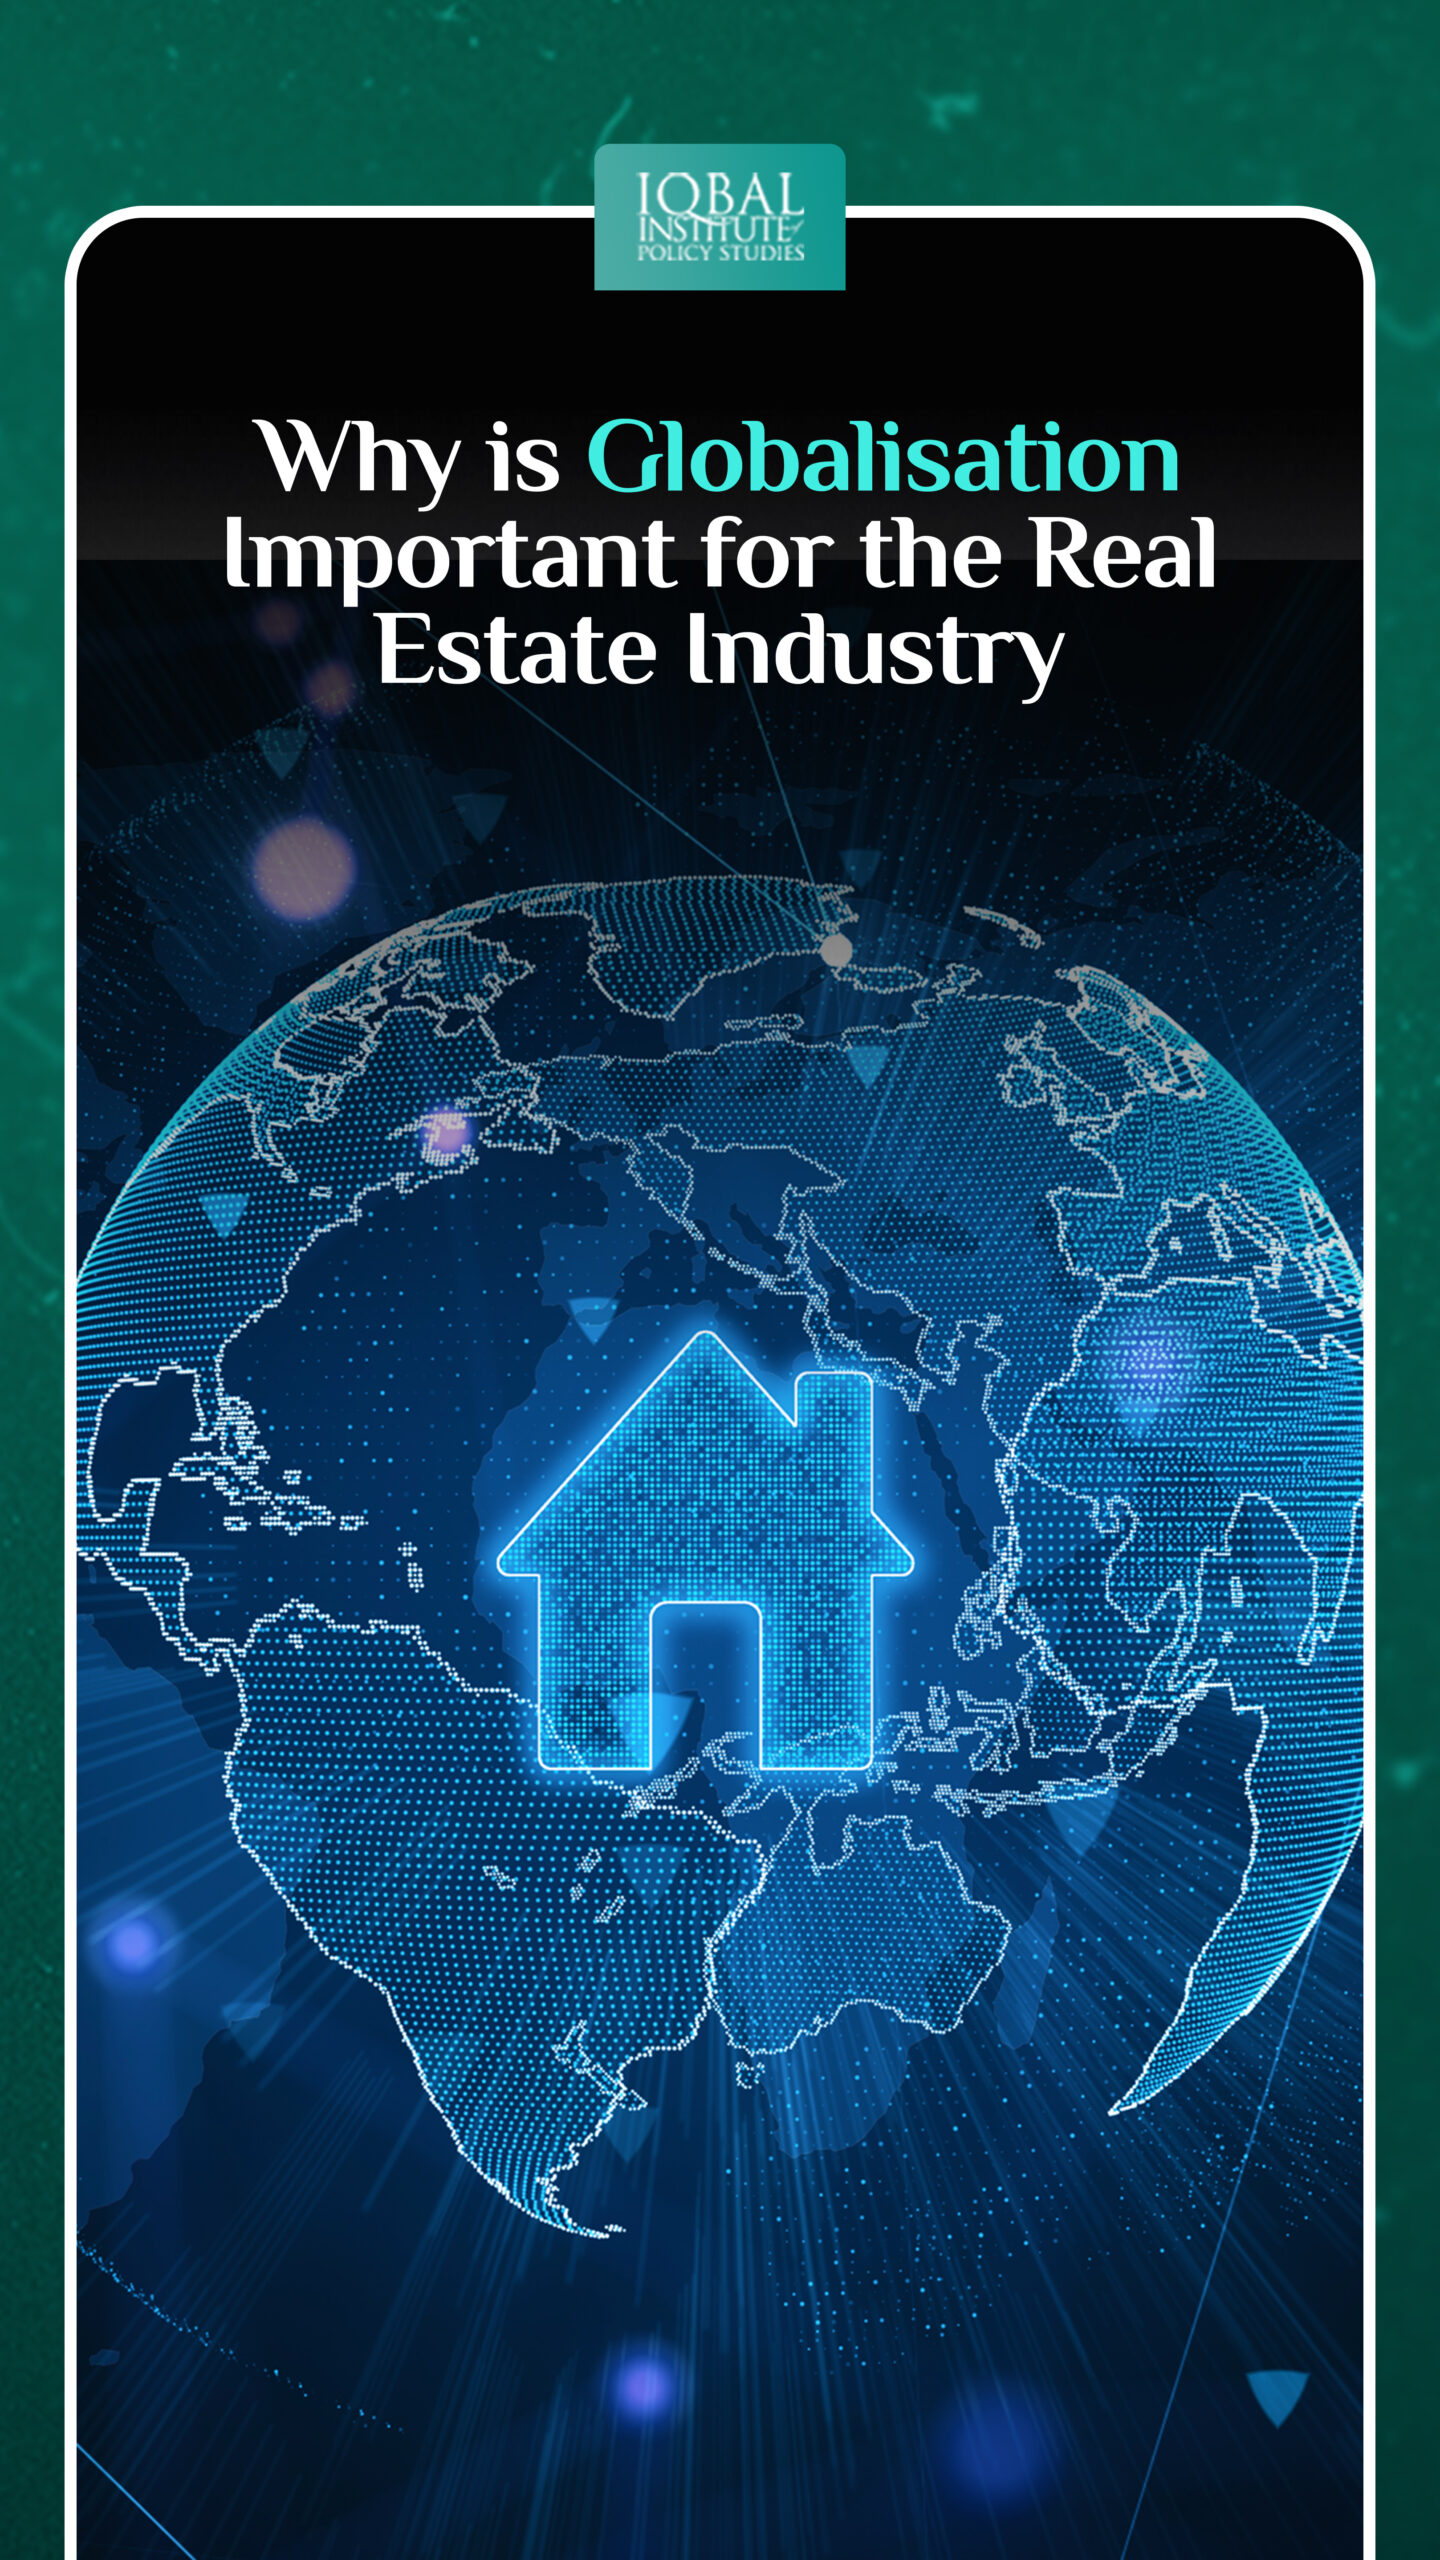 Why is Globalization Important for the Real Estate Industry?